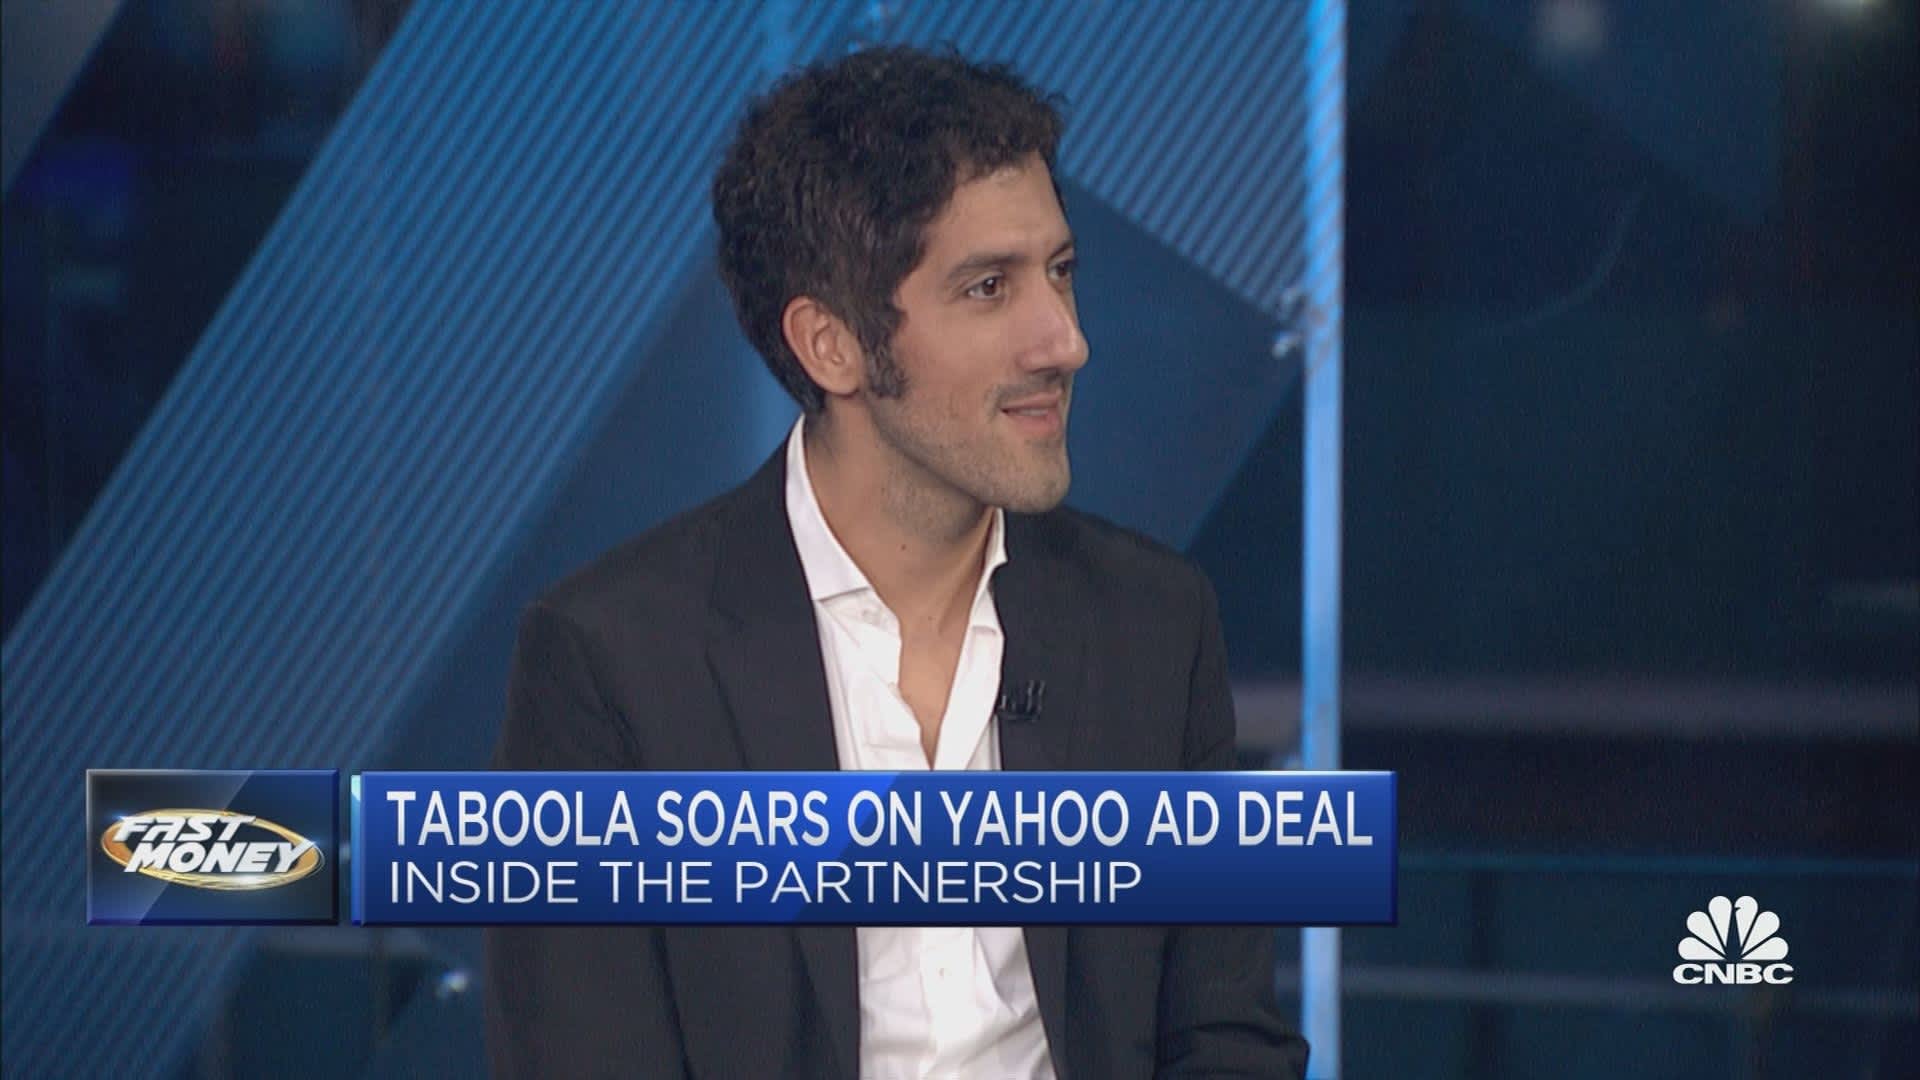 Yahoo ad deal will build ‘an internet consumers trust’